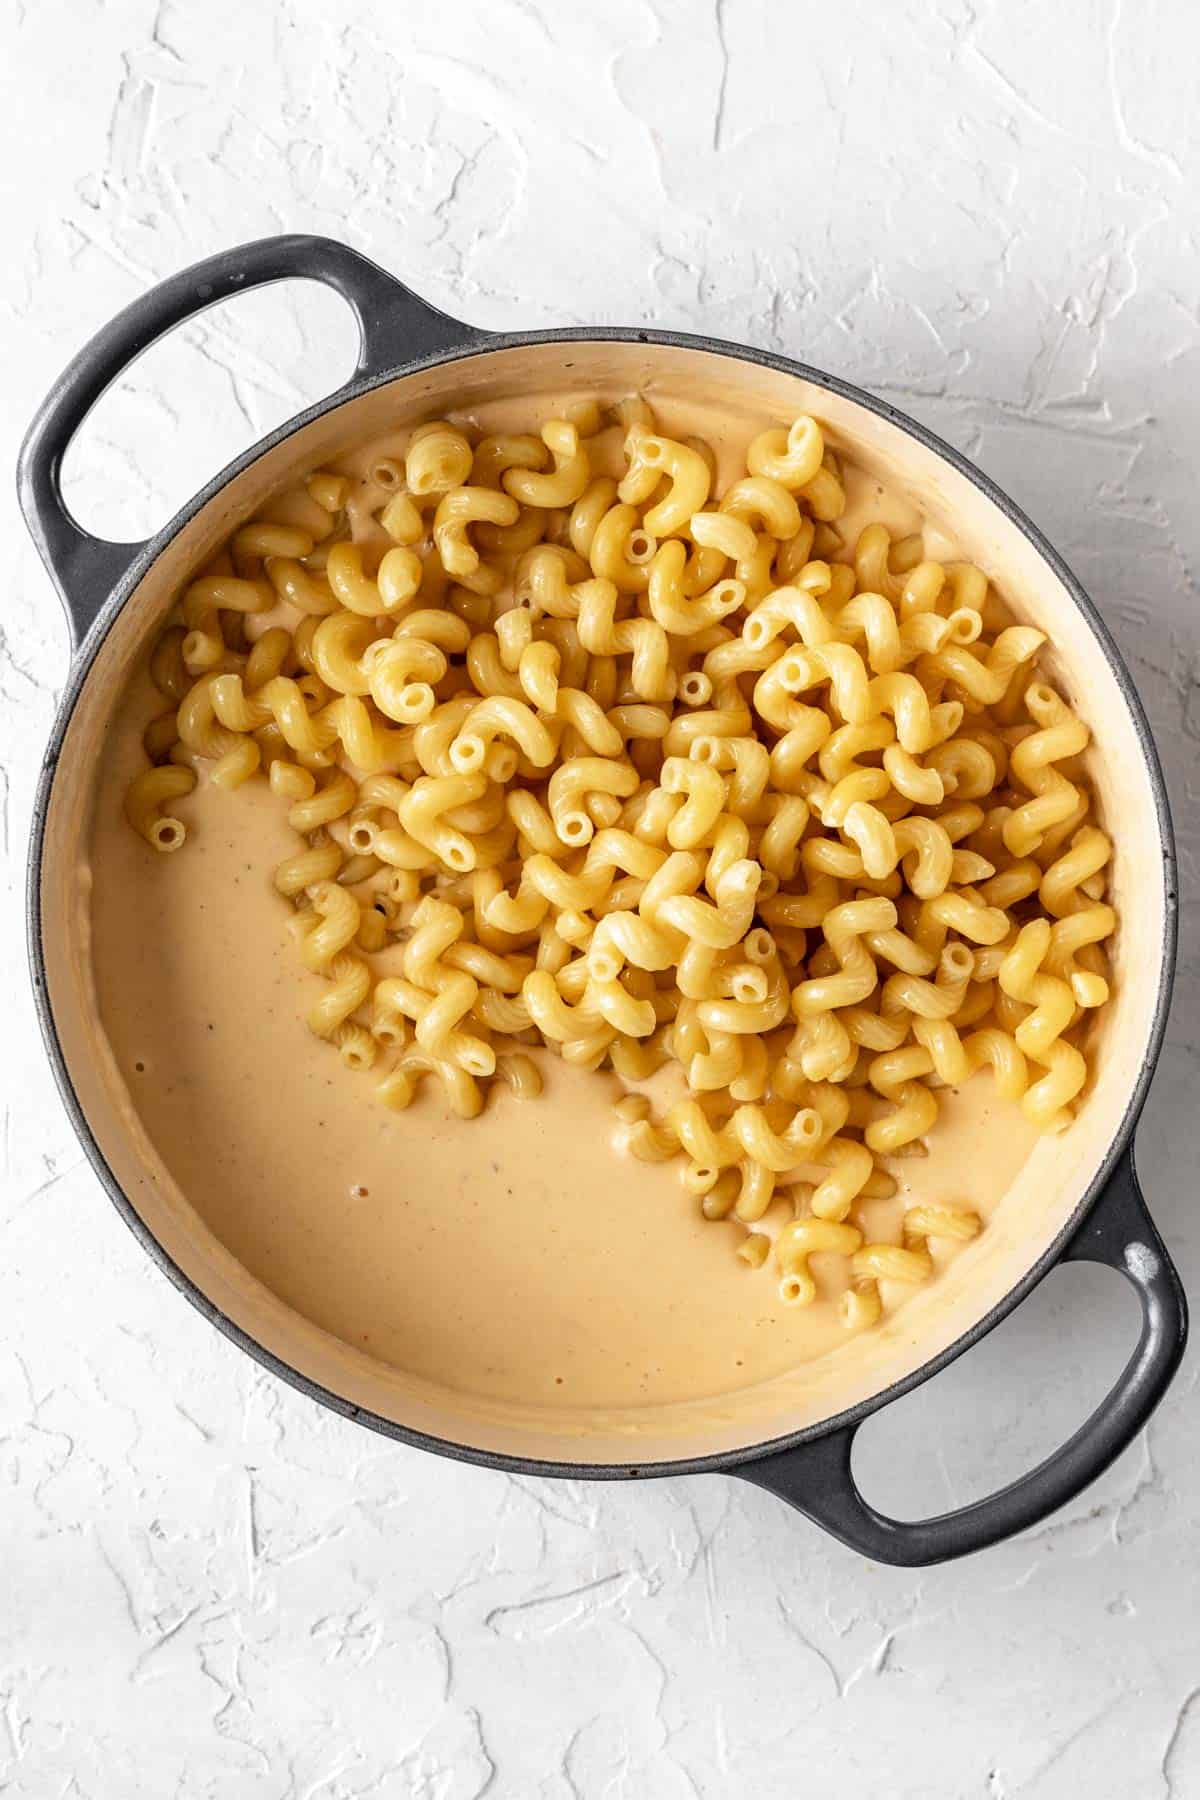 Cooked pasta added to the creamy cheddar cheese sauce.